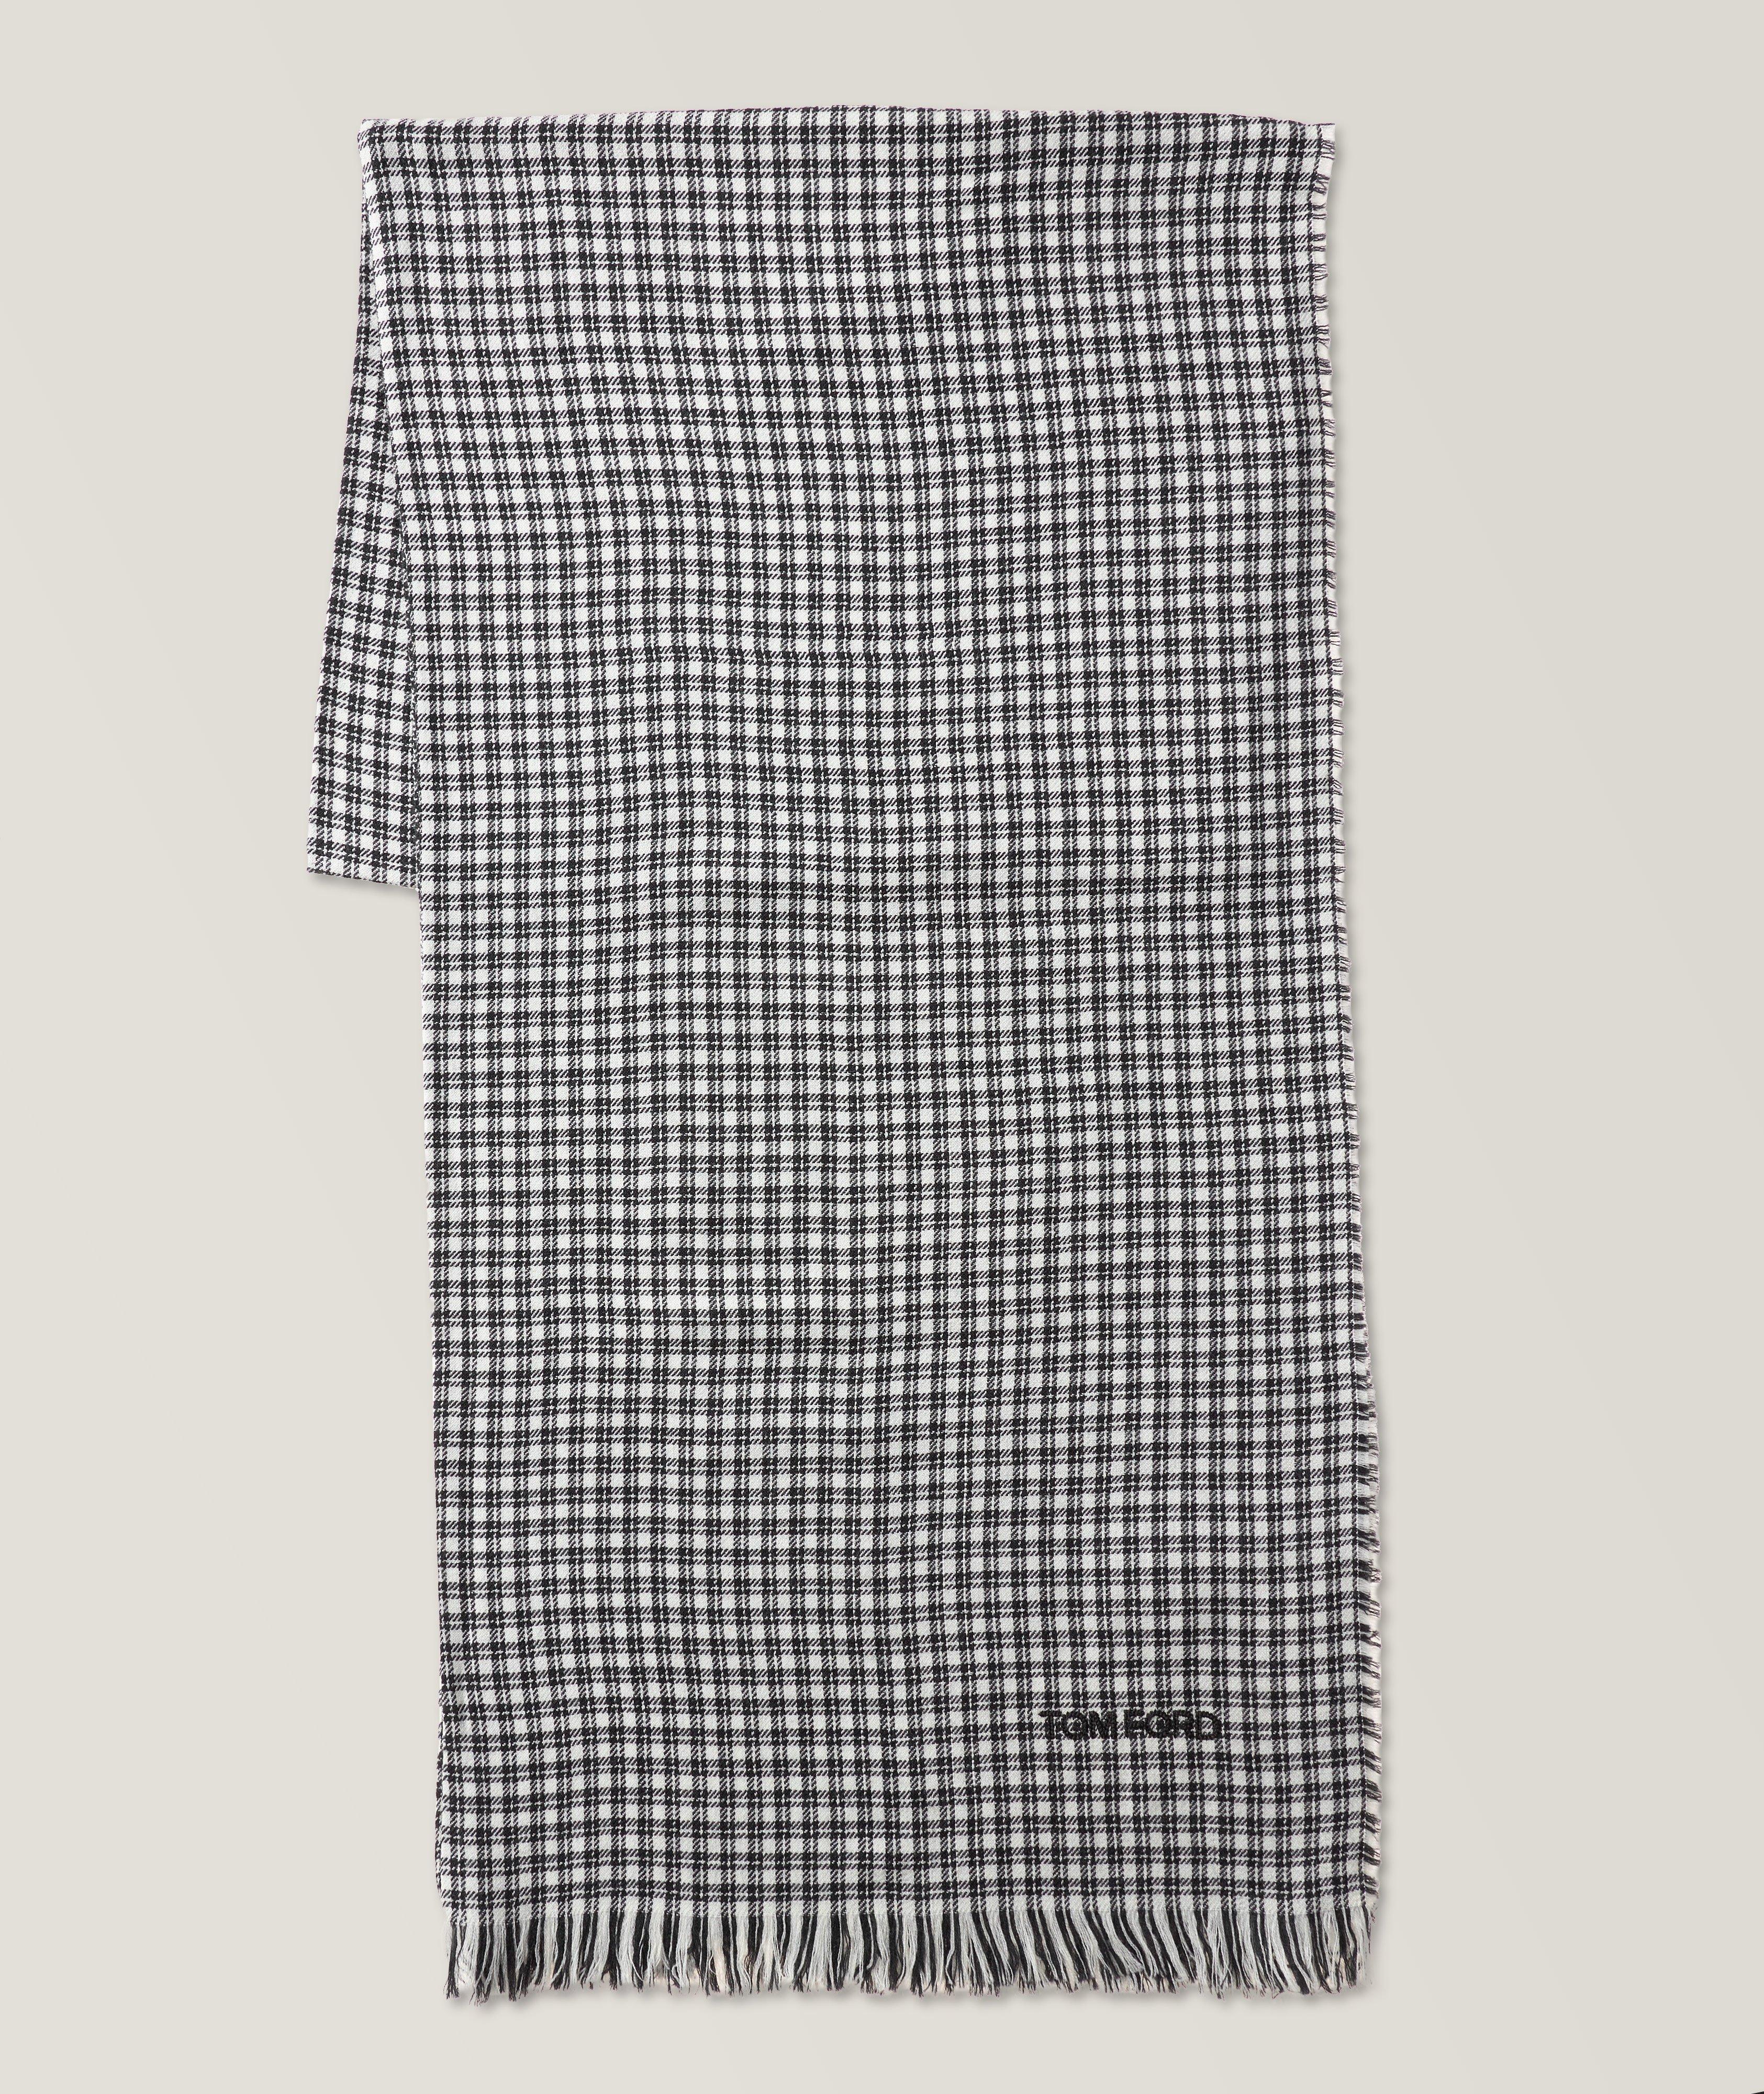 Checkered Wool Scarf image 0